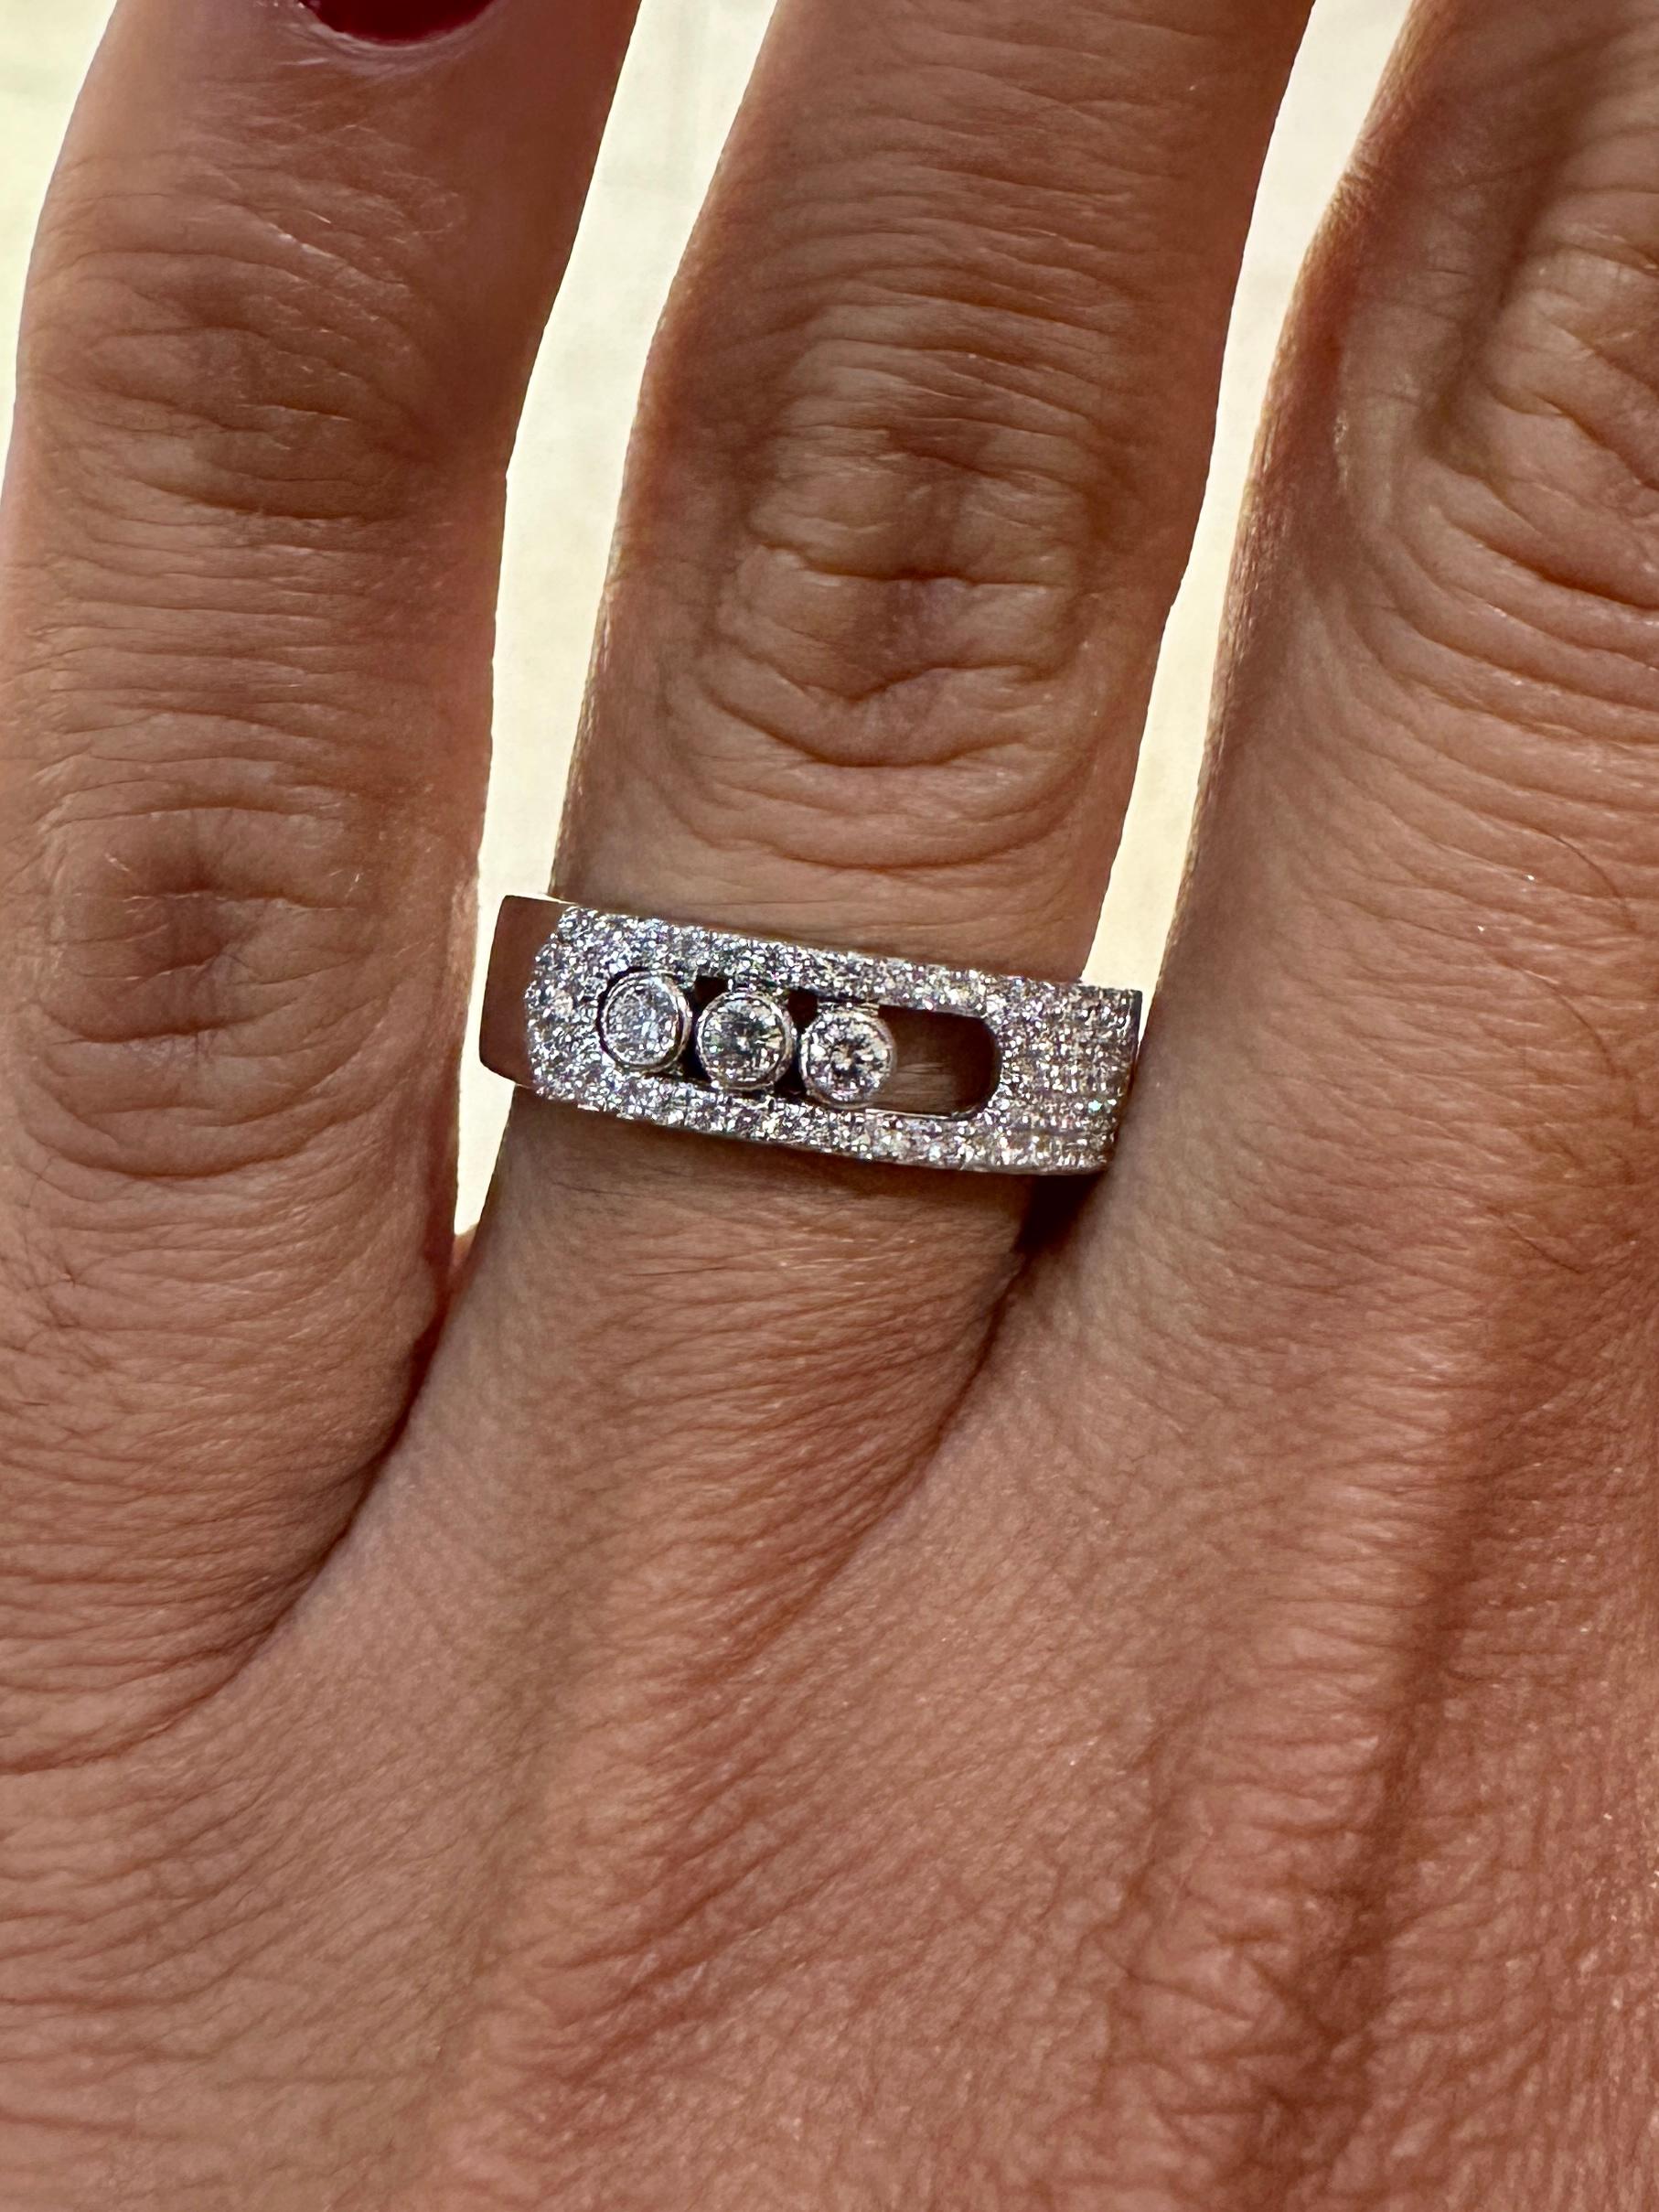 Messika Move Noa pavé ring in 18k white gold is set with three brilliant cut diamonds in motion. This white gold diamond band ring is like a golden ribbon that wraps around the finger. This ring is perfect to mark a precious moment or an engagement.